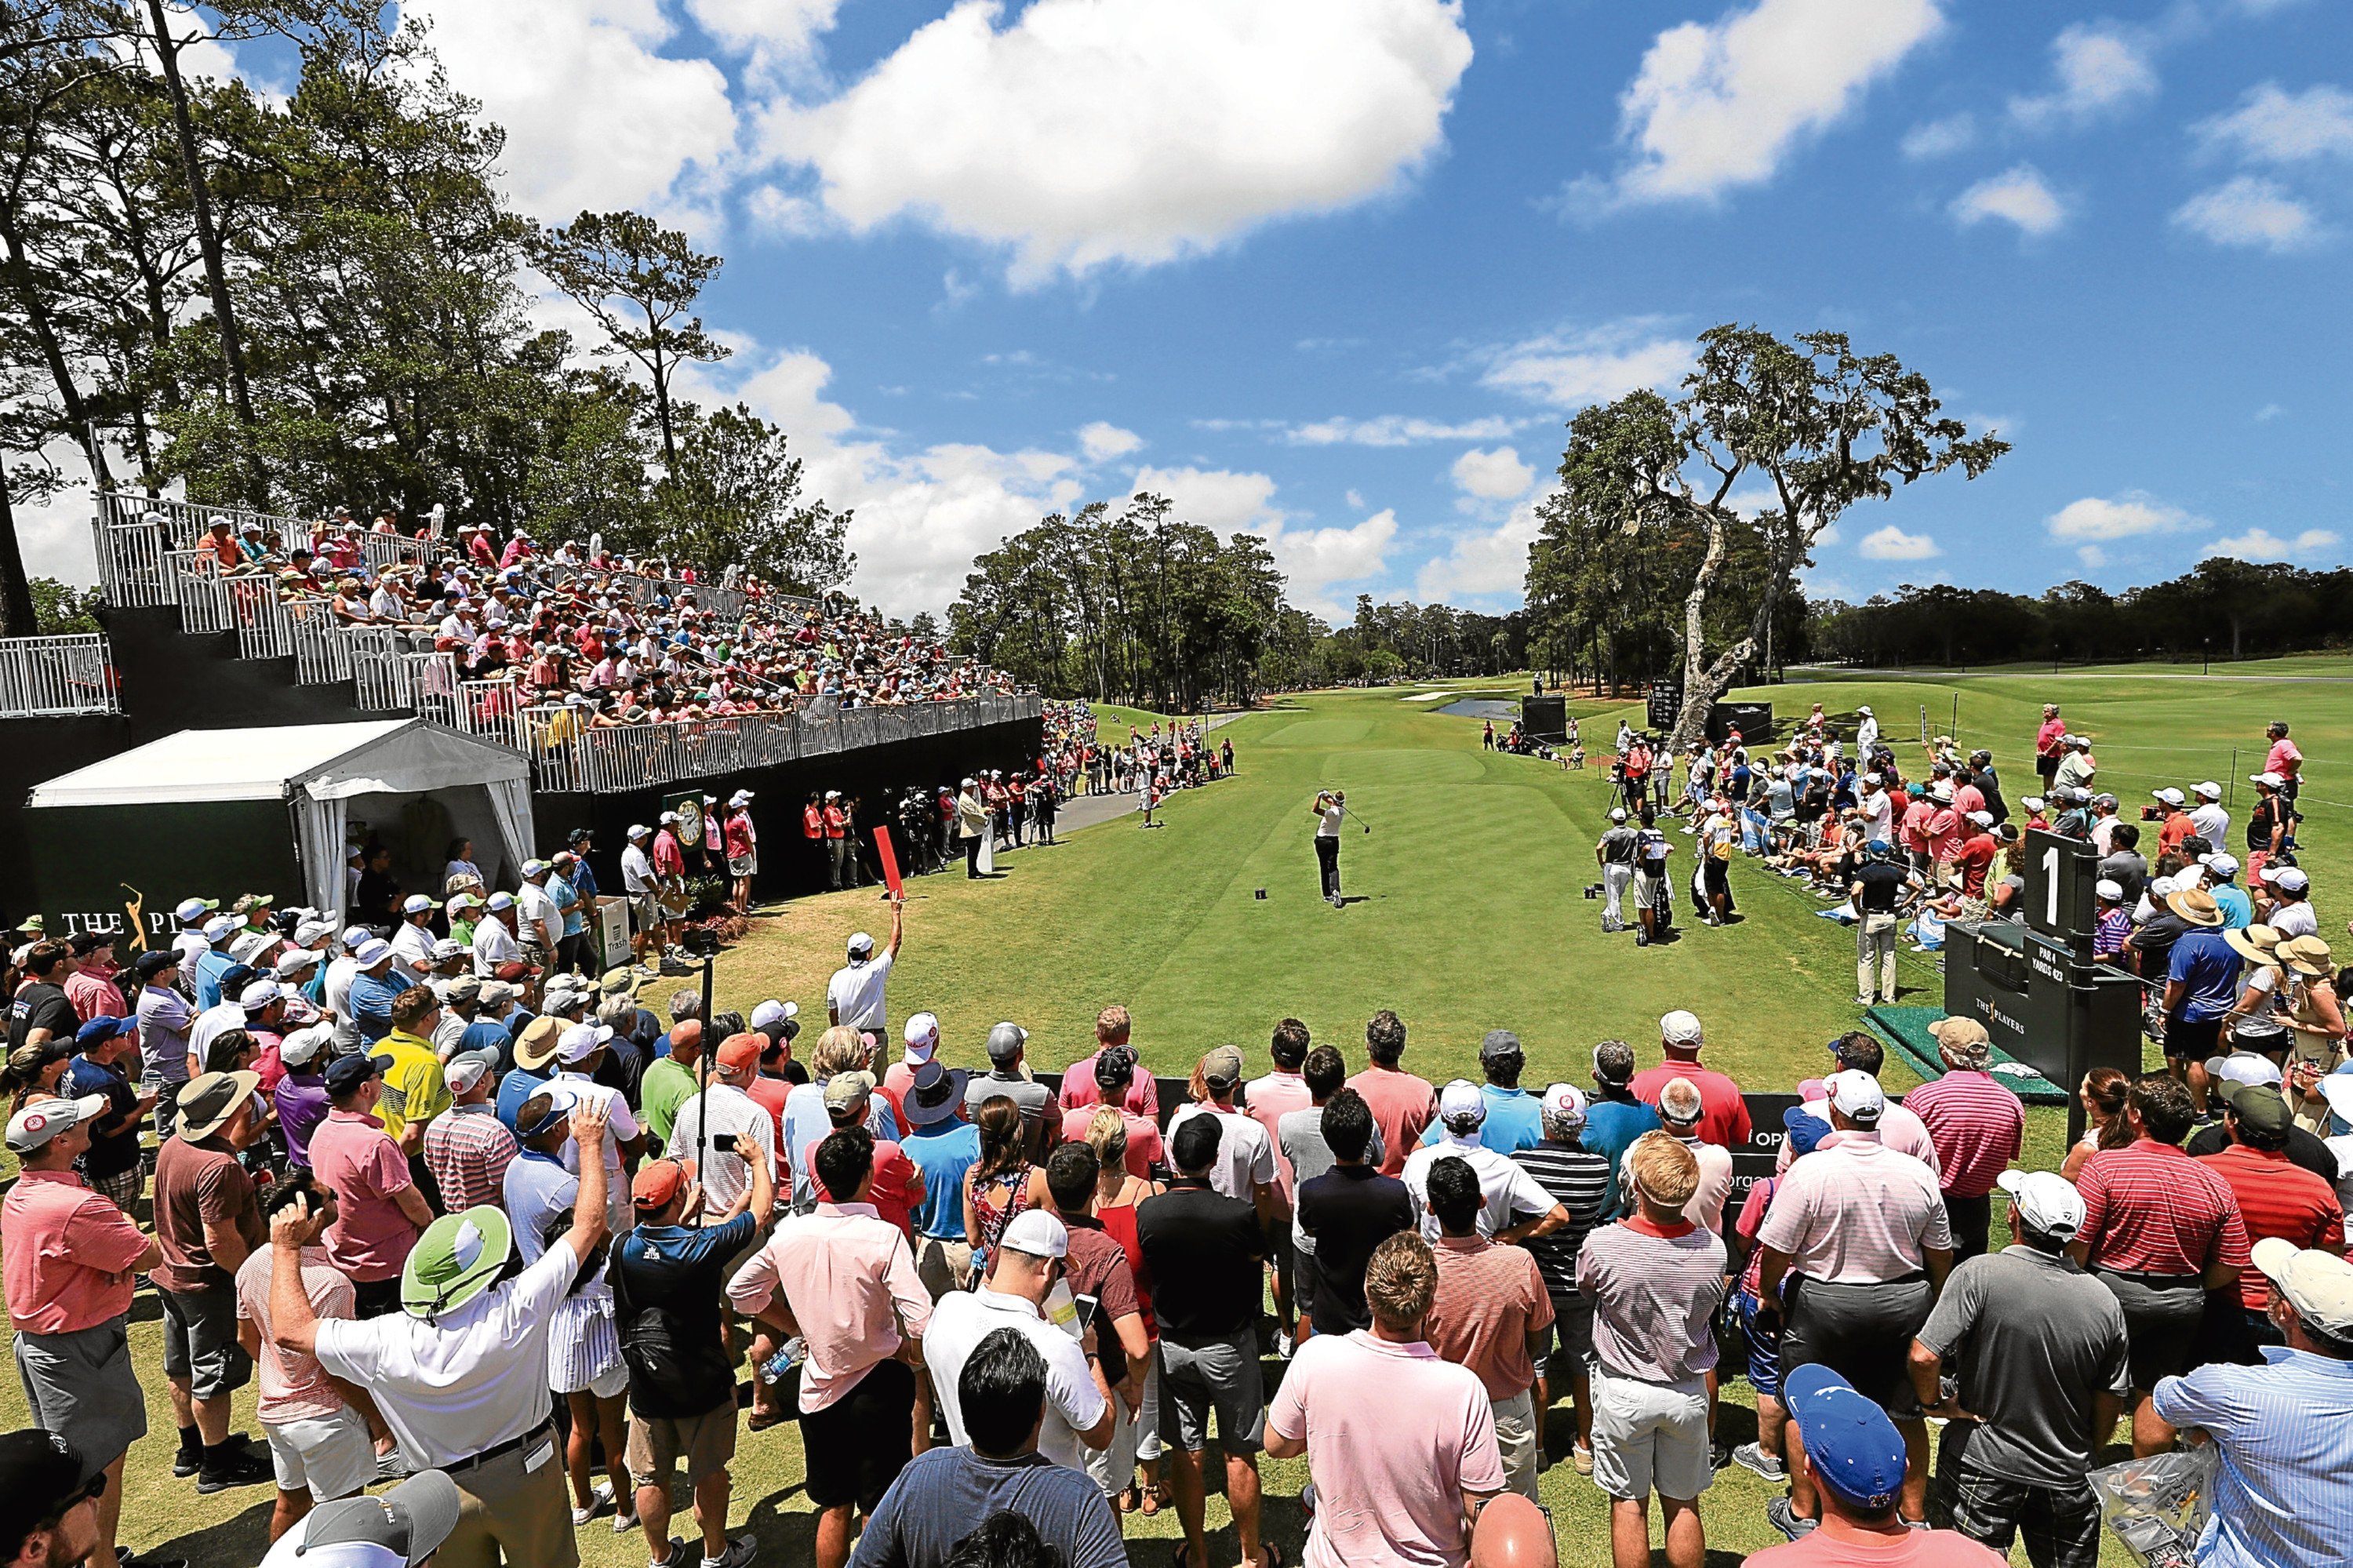 Ian Poulter hits from the first tee during the final round of the Players at Sawgrass.